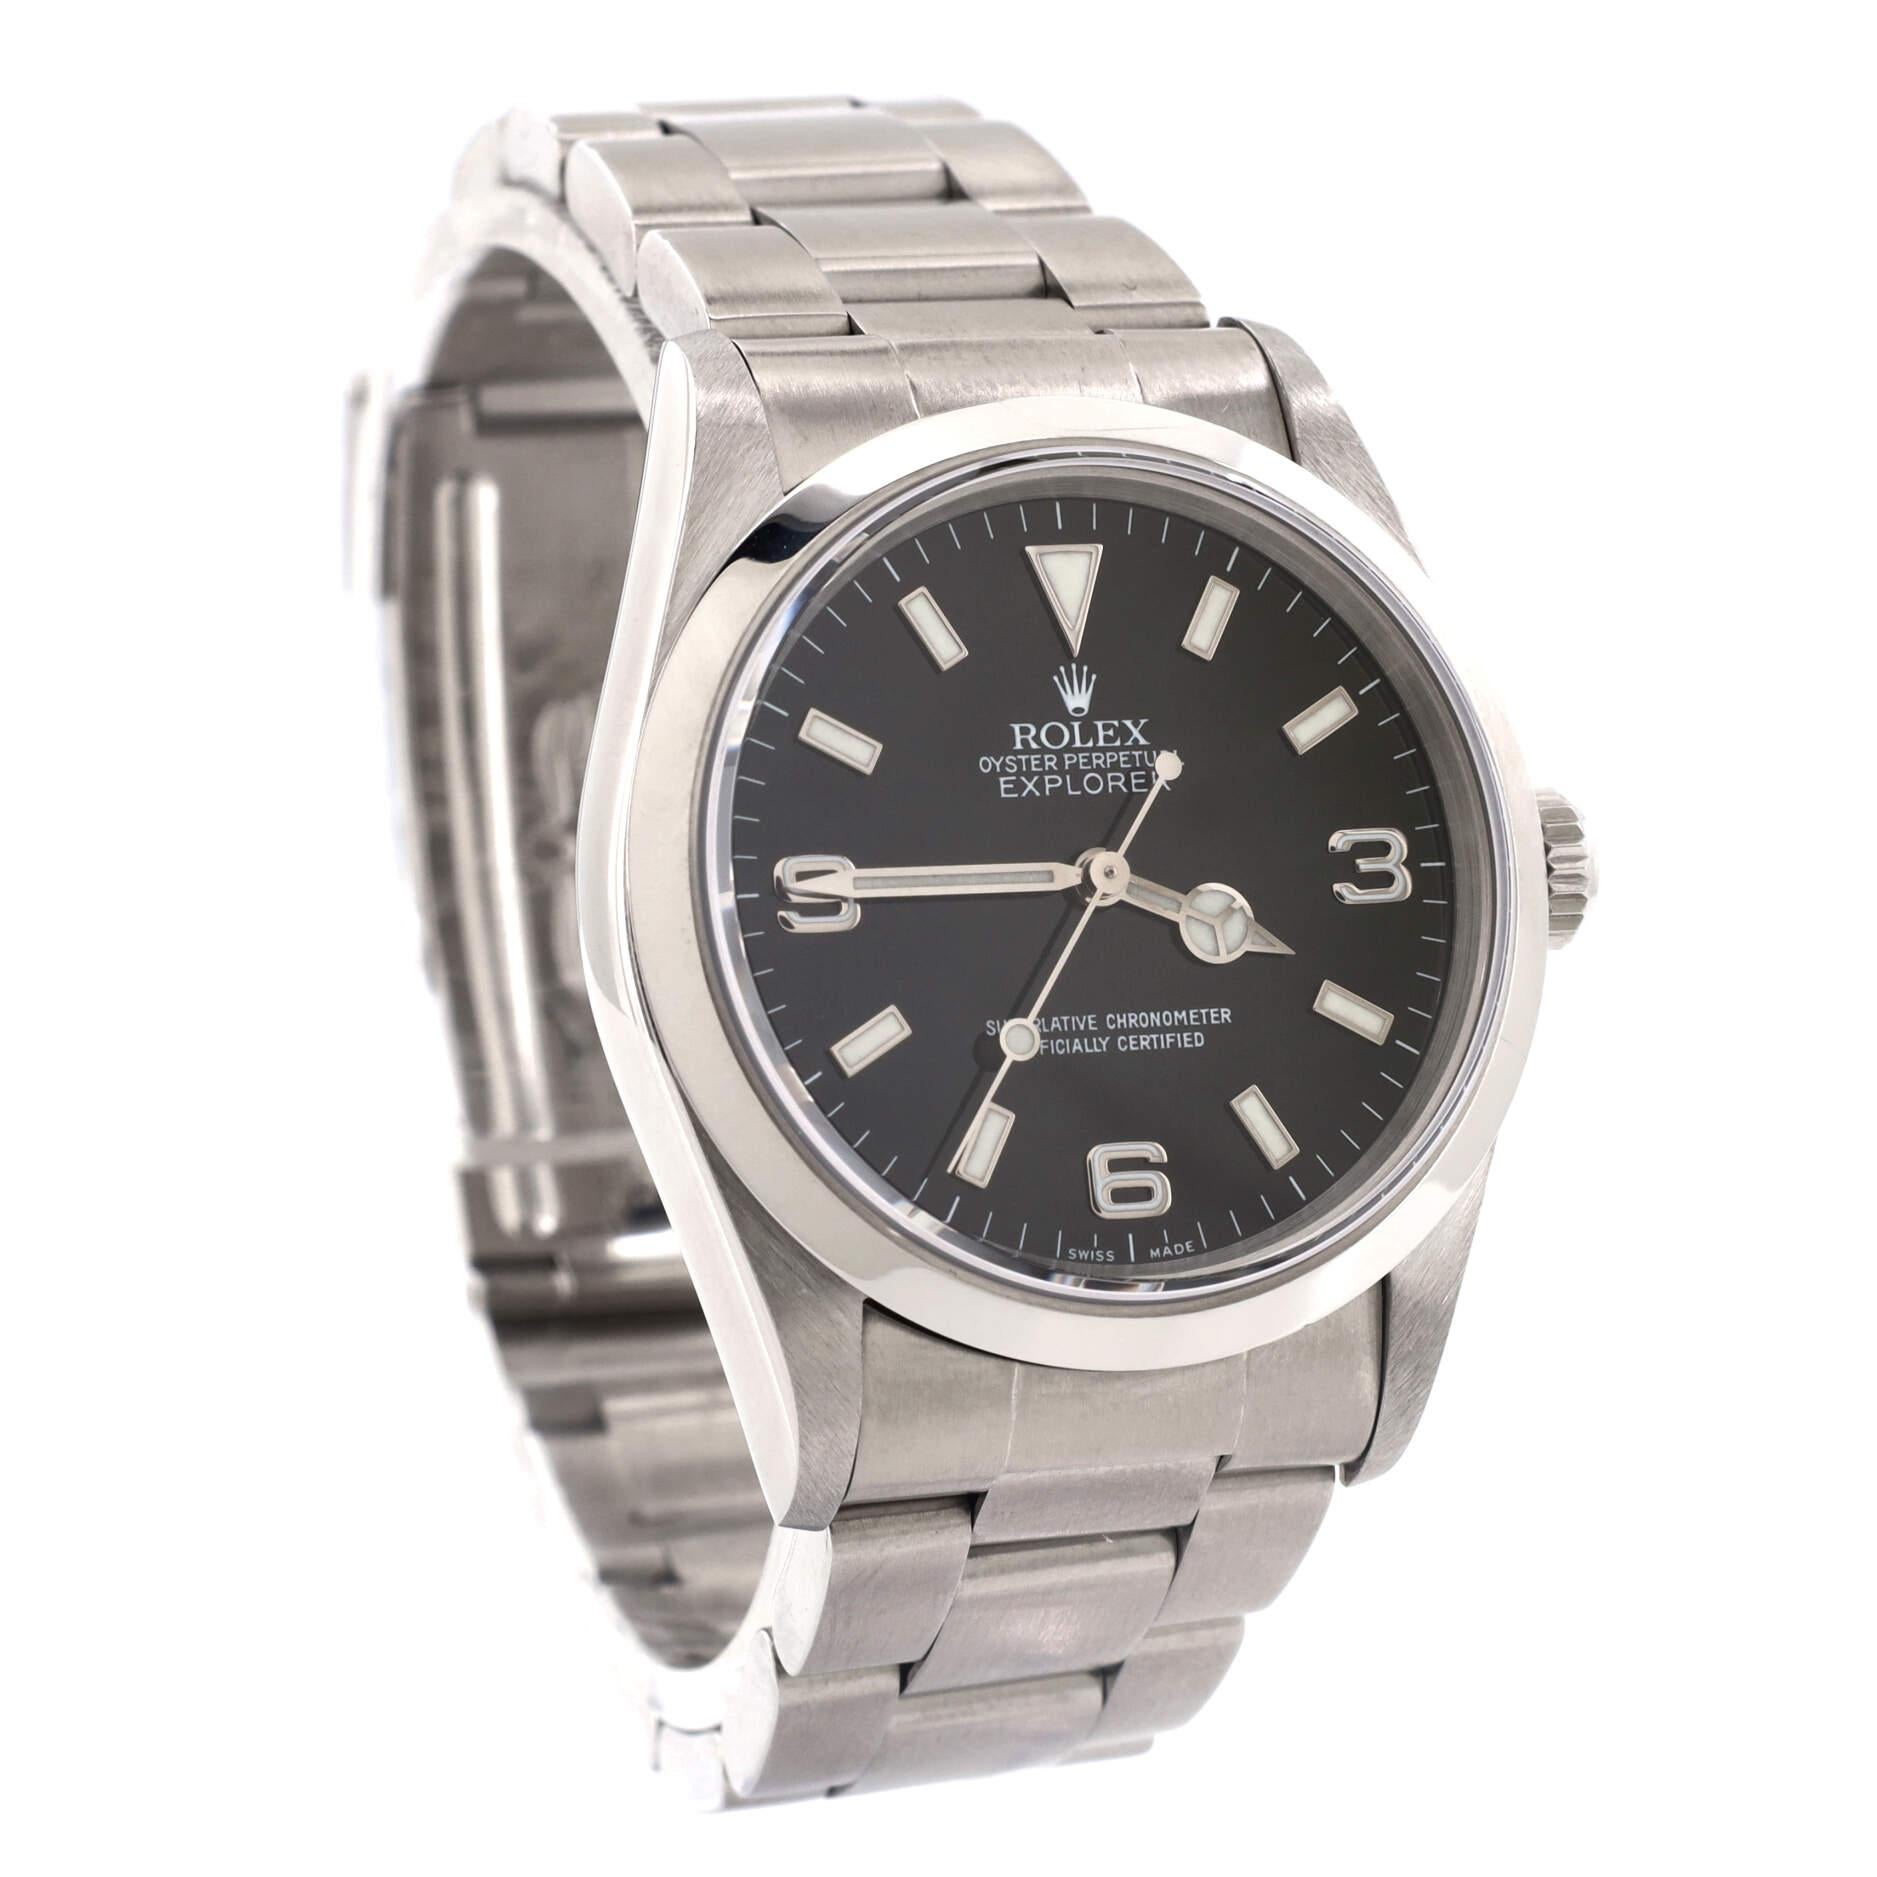 Condition: Great. Minor wear throughout case and bracelet.
Accessories: No Accessories
Measurements: Case Size/Width: 36mm, Watch Height: 12mm, Band Width: 20mm, Wrist circumference: 6.25